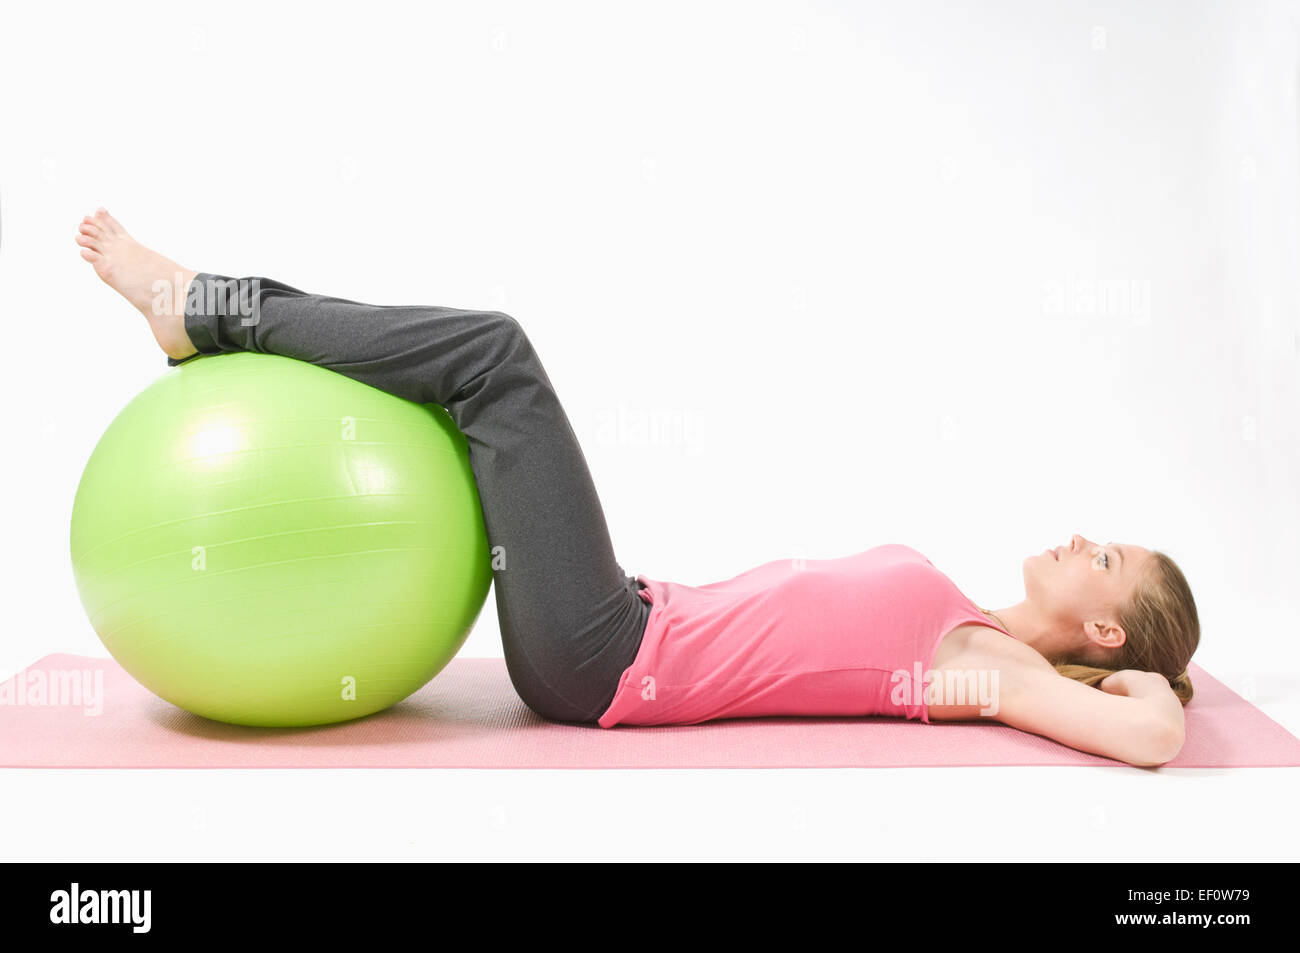 Woman with her legs on exercise ball Stock Photo